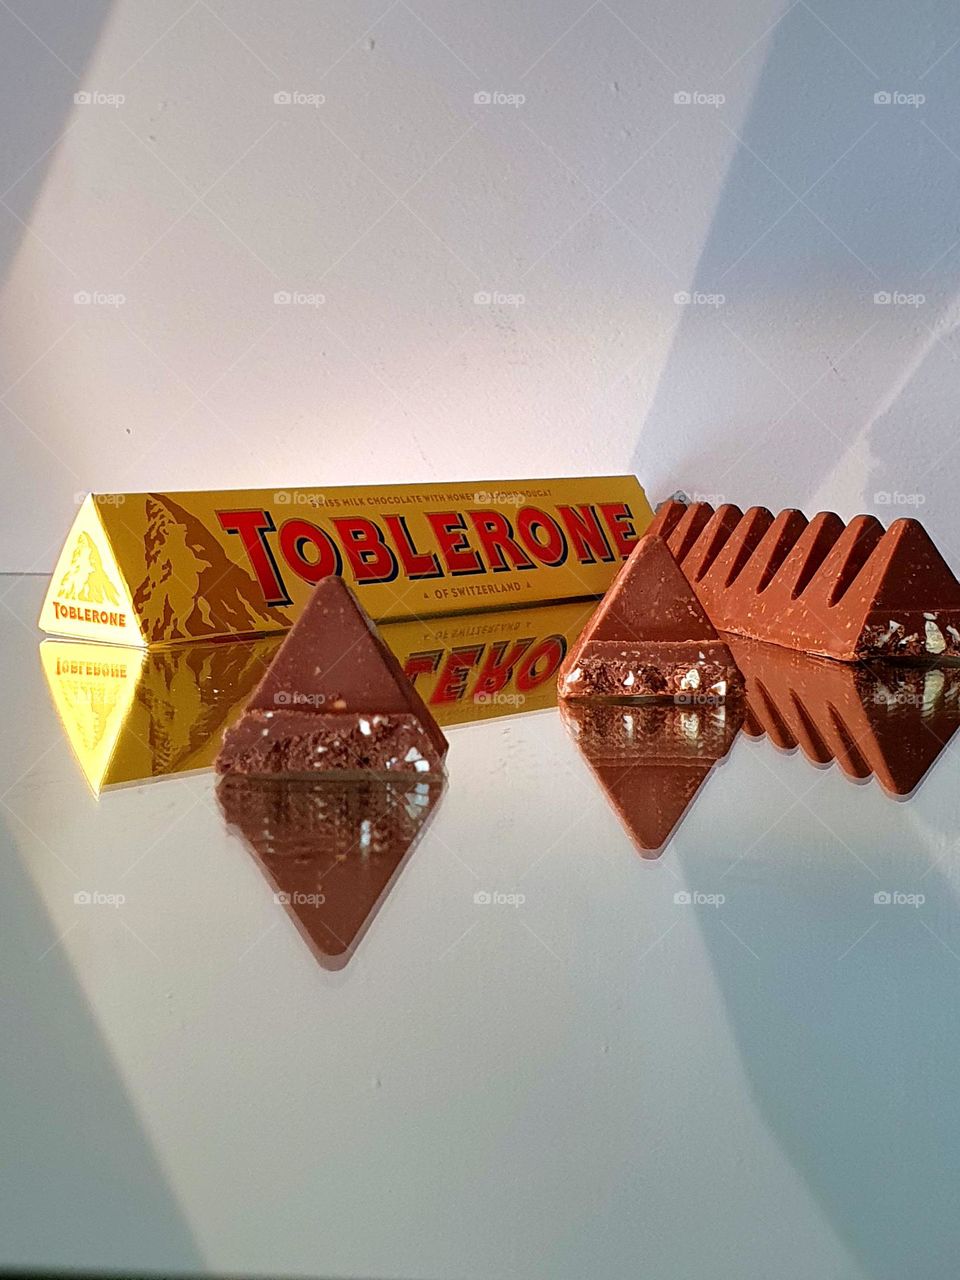 triangle - Toblerone- triangular chocolate with almonds - see double